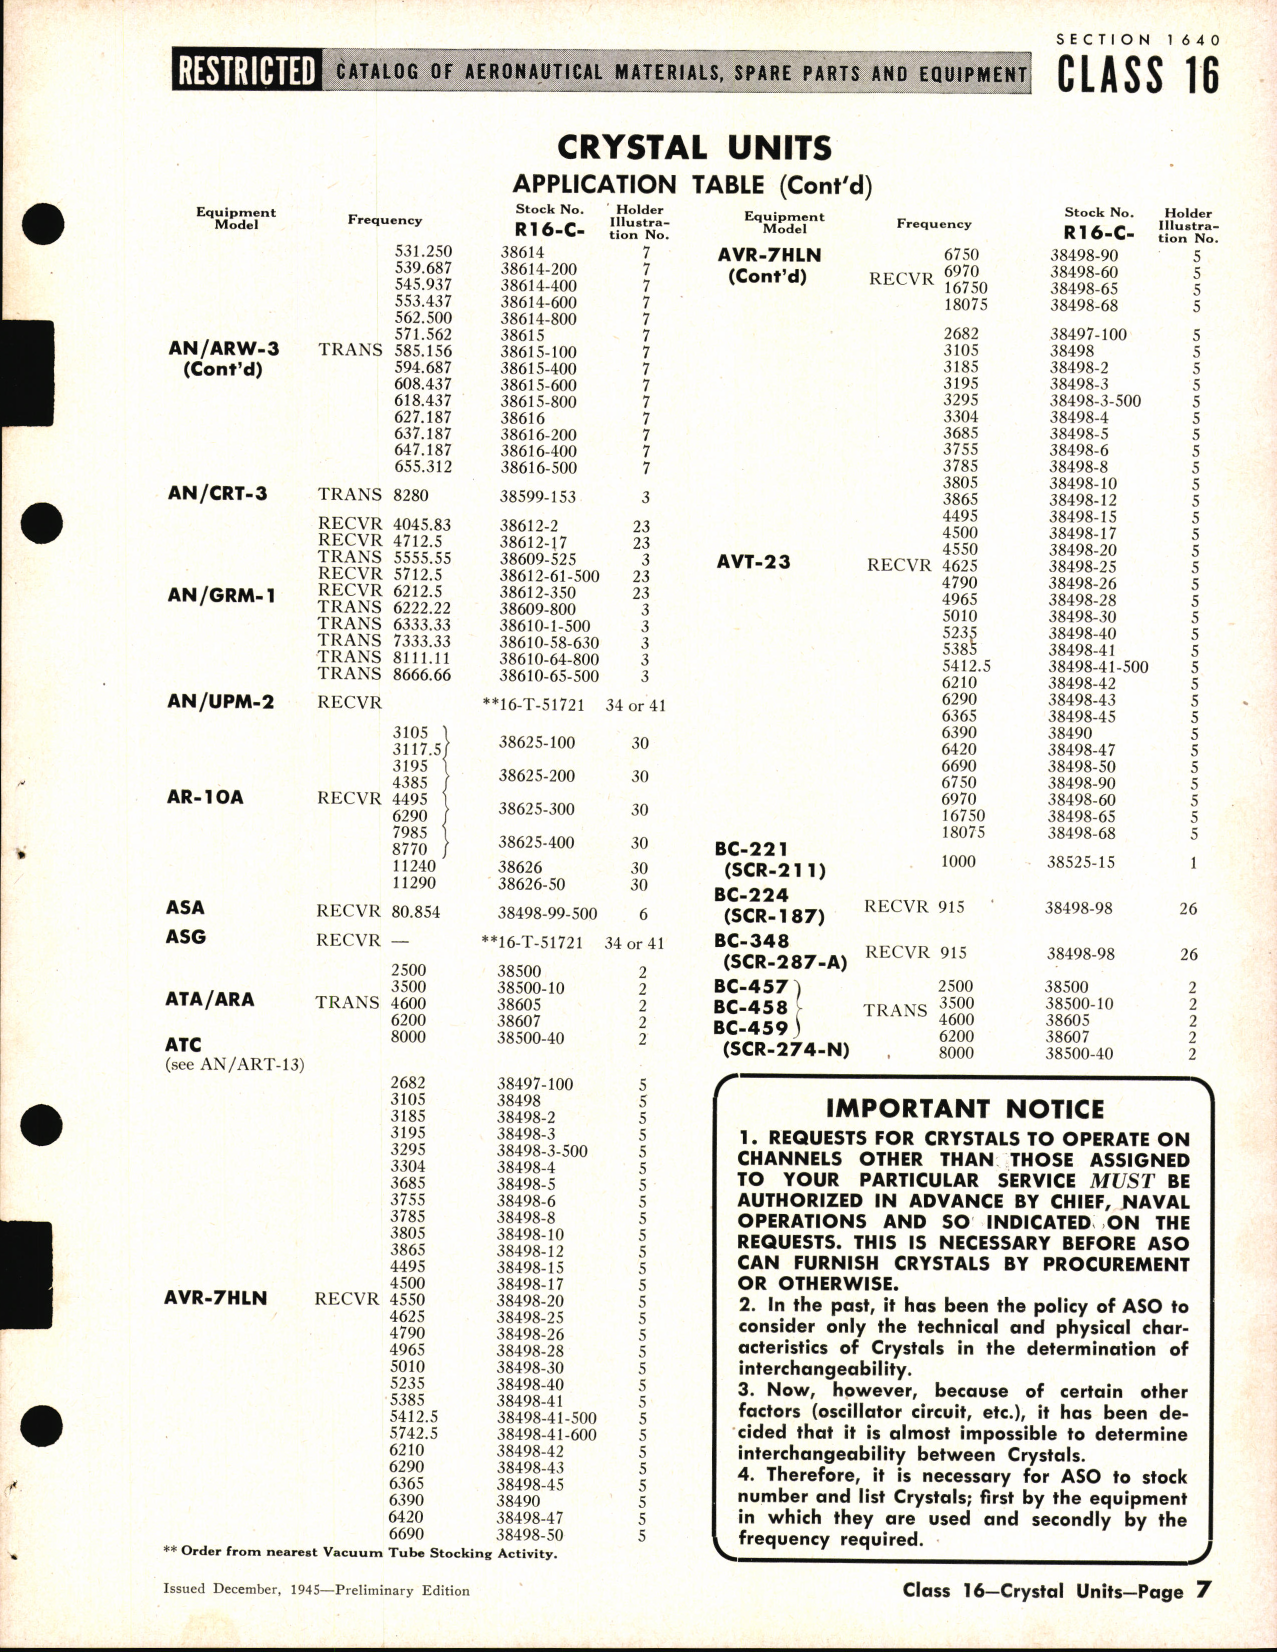 Sample page 7 from AirCorps Library document: Crystal Units